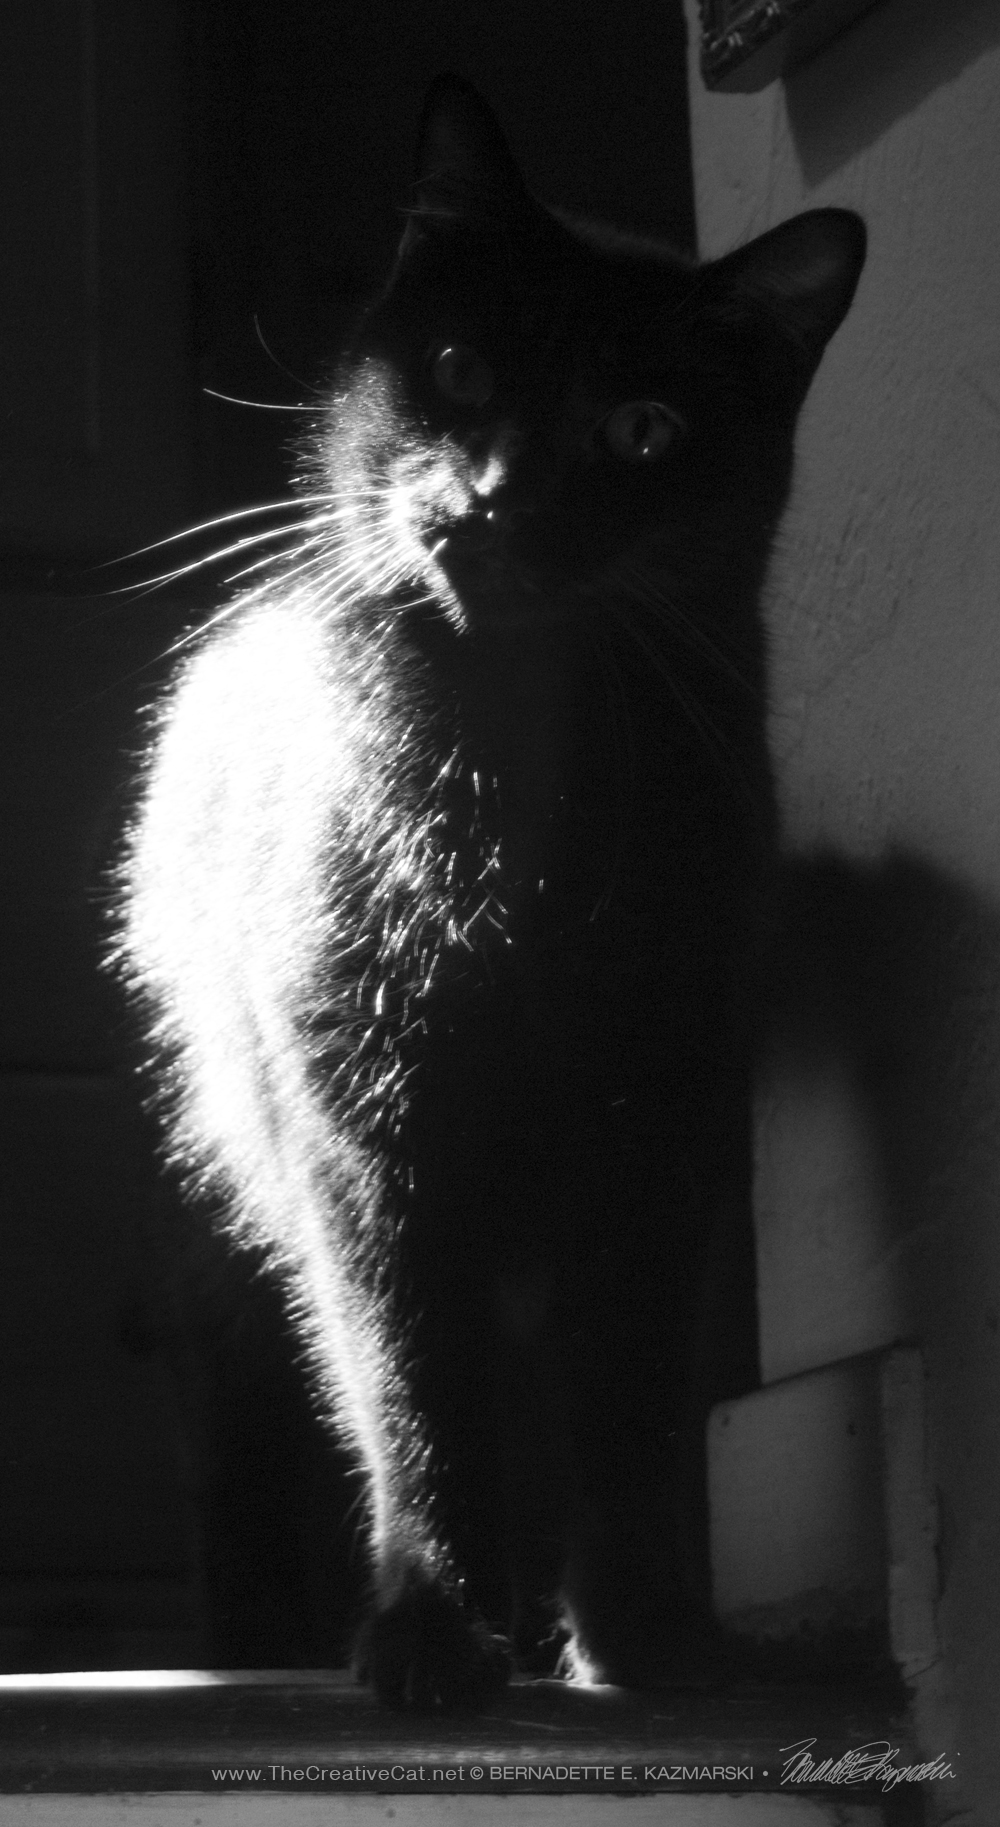 balck cat in black and white